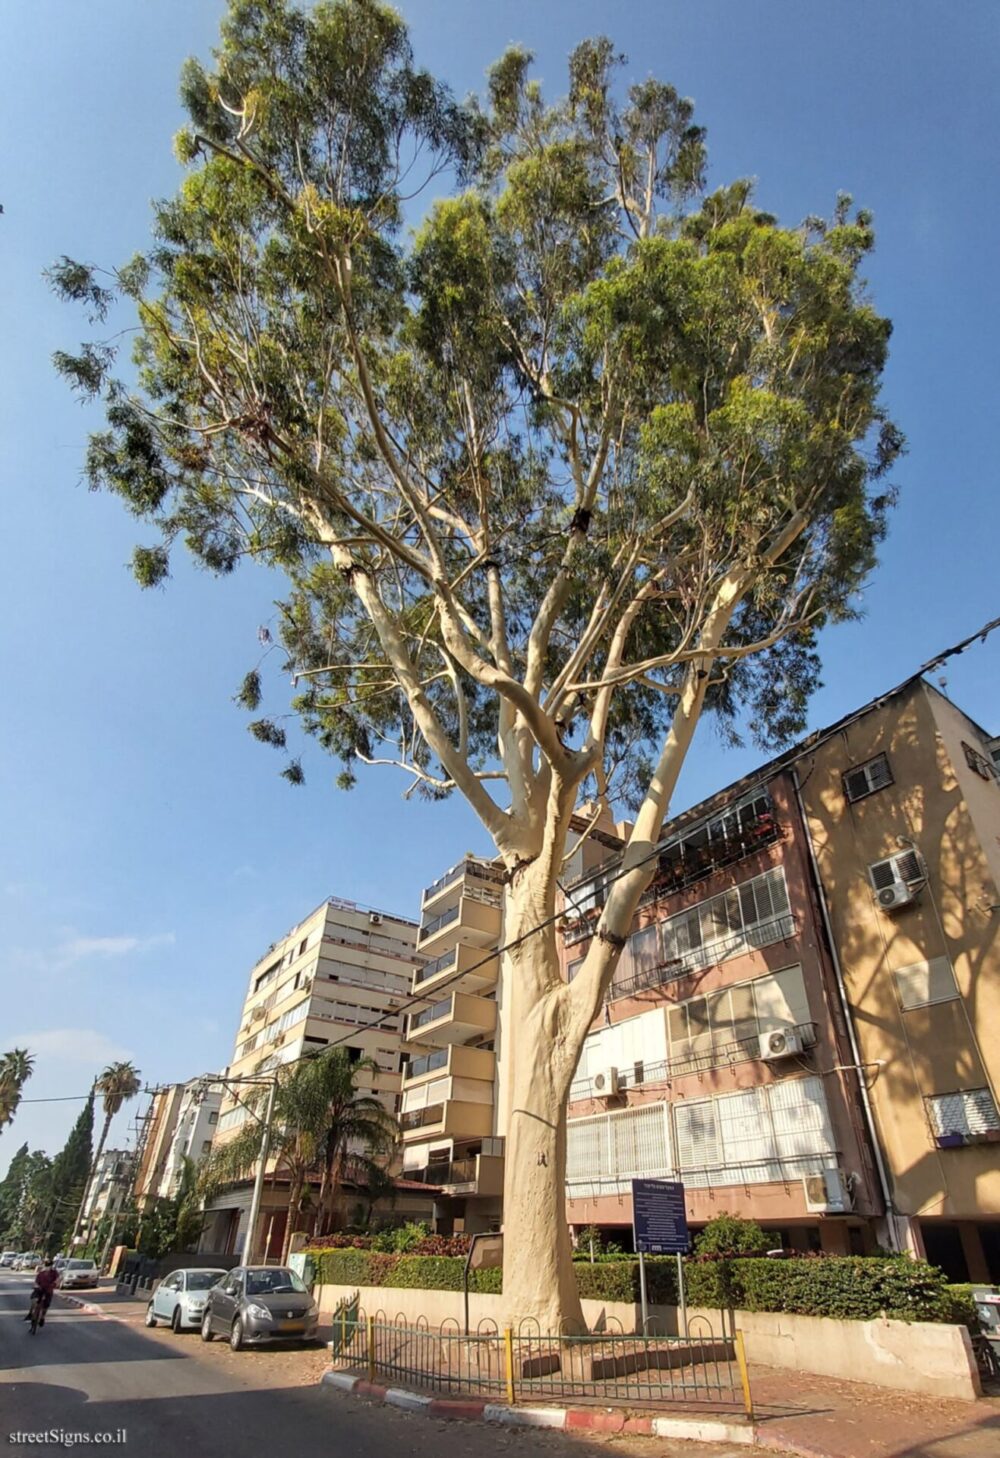 This lemon-scented eucalyptus (gum tree) in Petah Tikva is extremely rare in Israel. Photo courtesy of Eli Zvuluny/StreetSigns.co.il